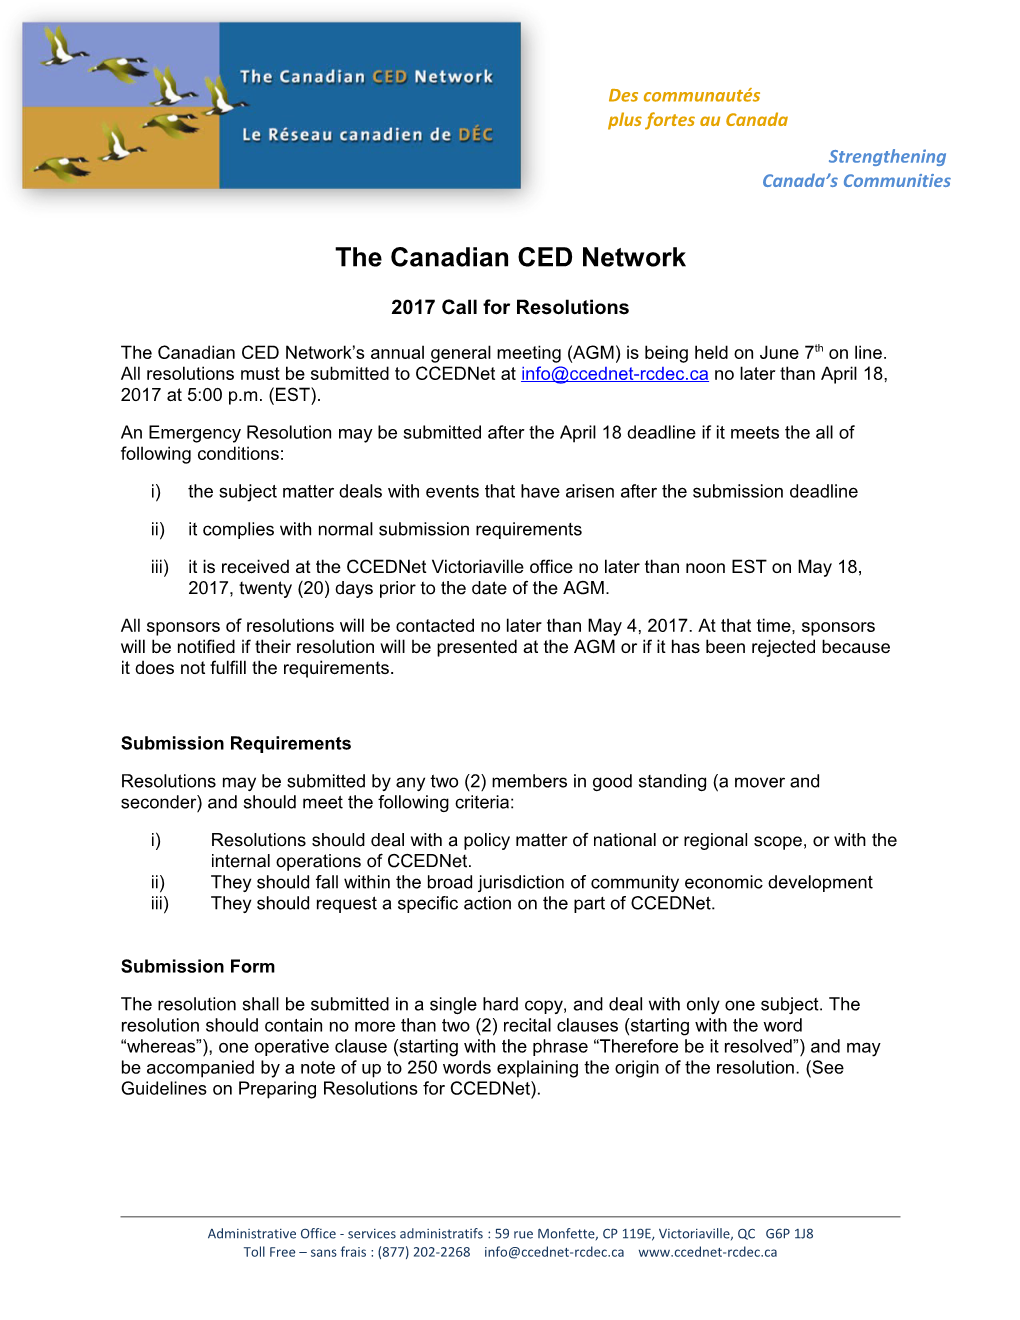 The Canadian CED Network